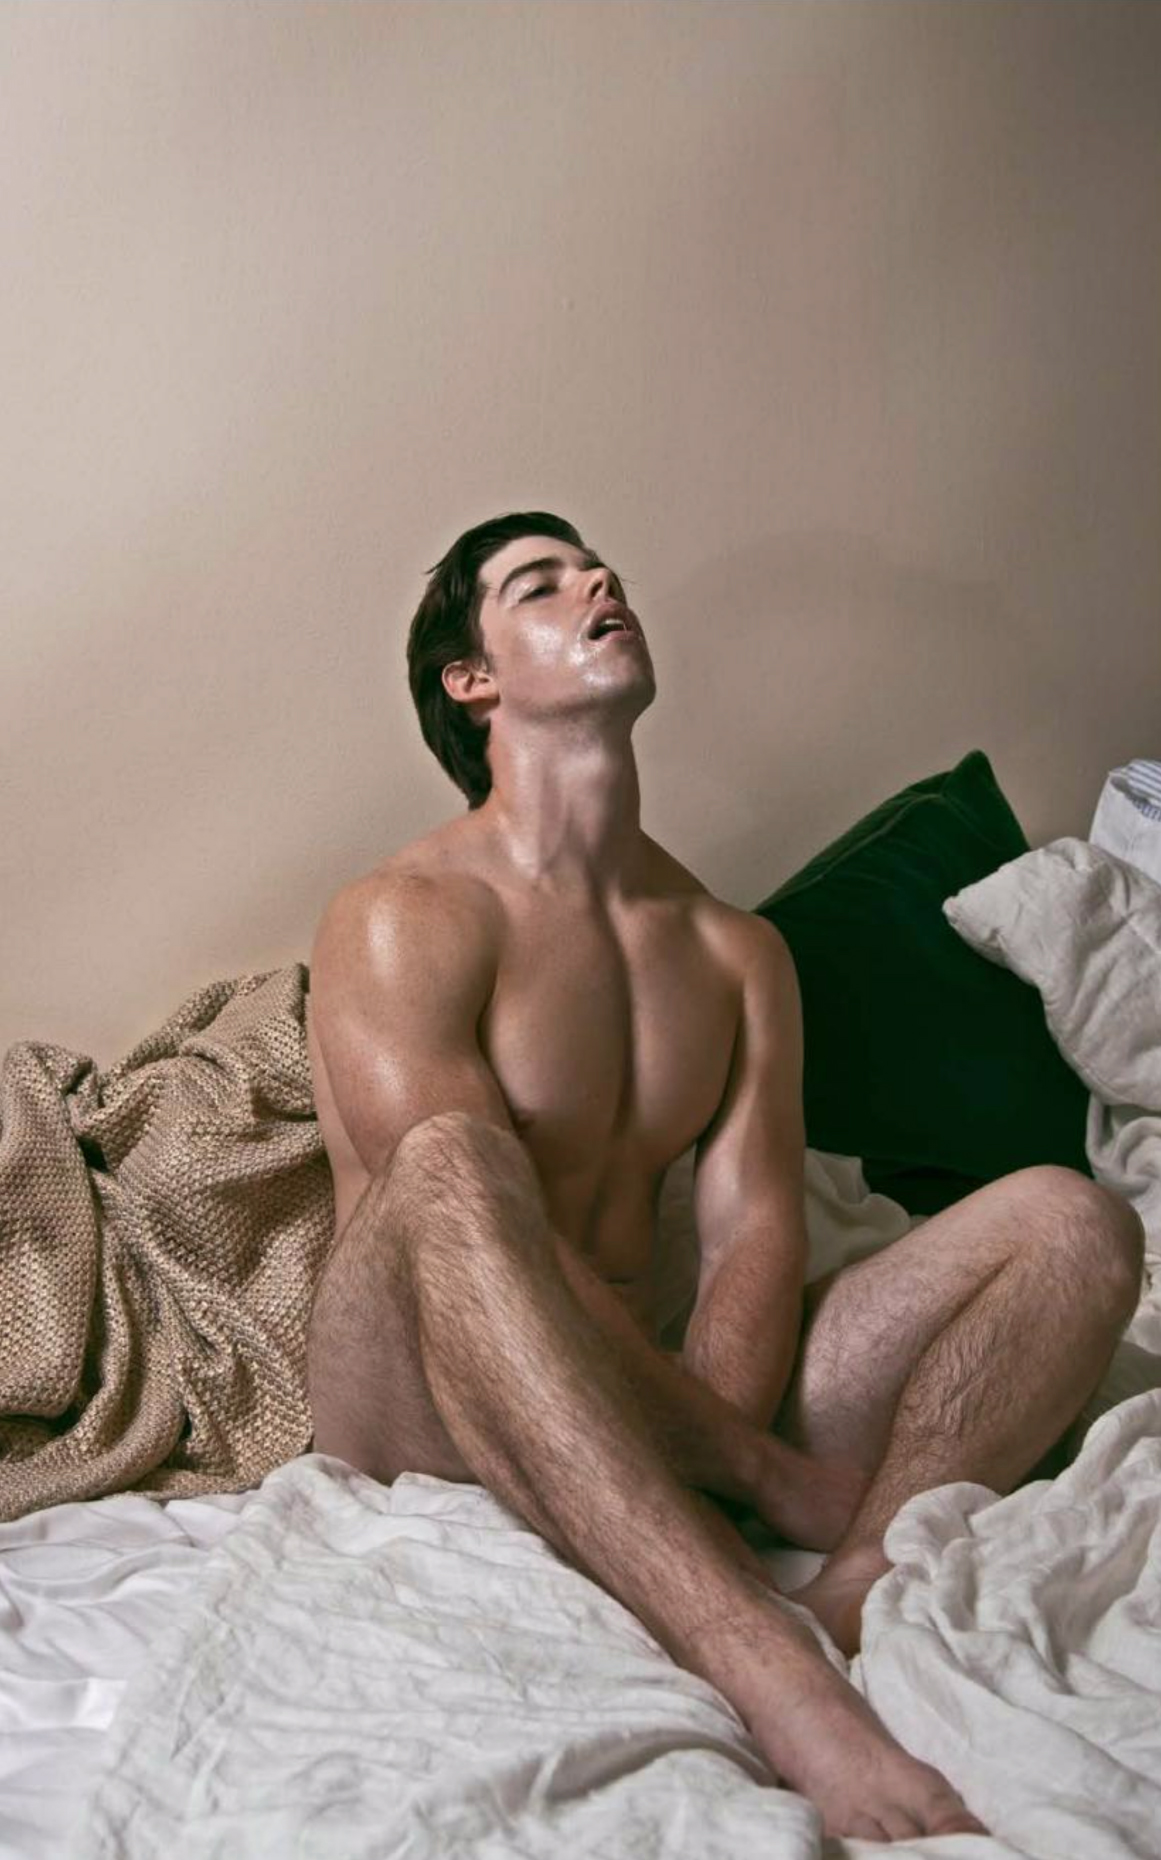 Hot man in a hotel room - NSFW- – Gay Side of Life